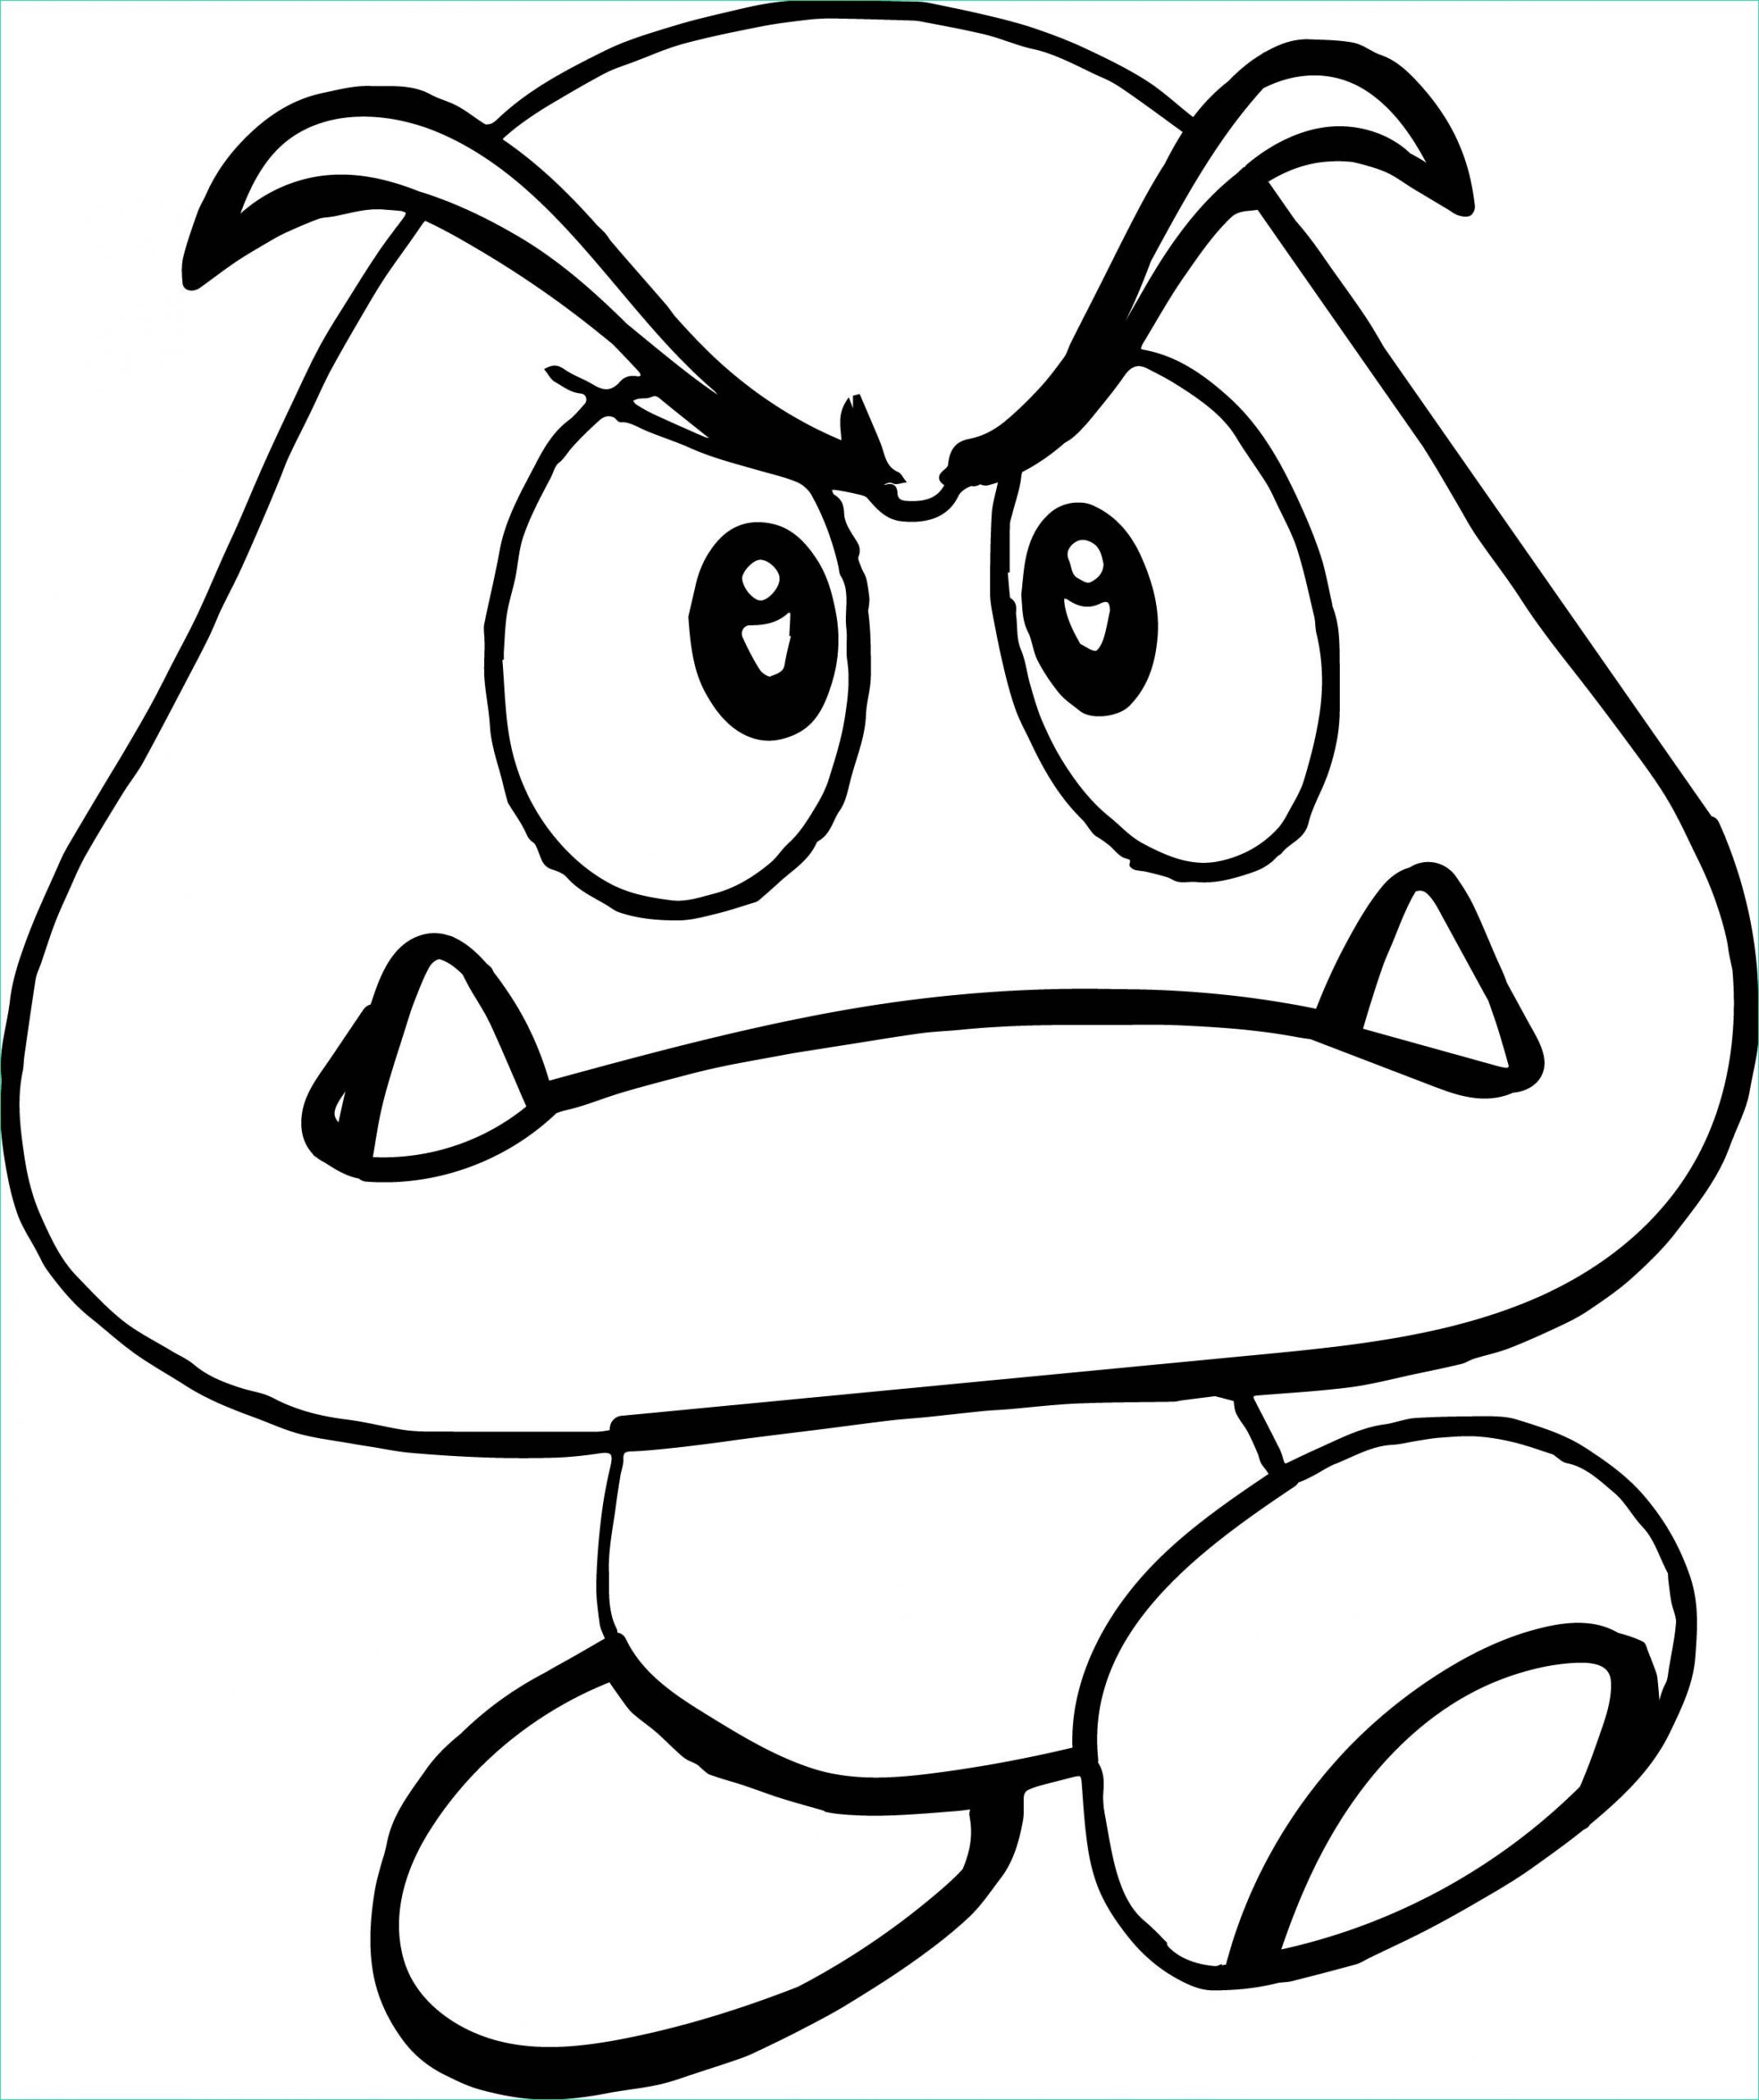 Coloriage Mario Galaxy Impressionnant Image Mario Coloring Pages for Boys at Getcolorings